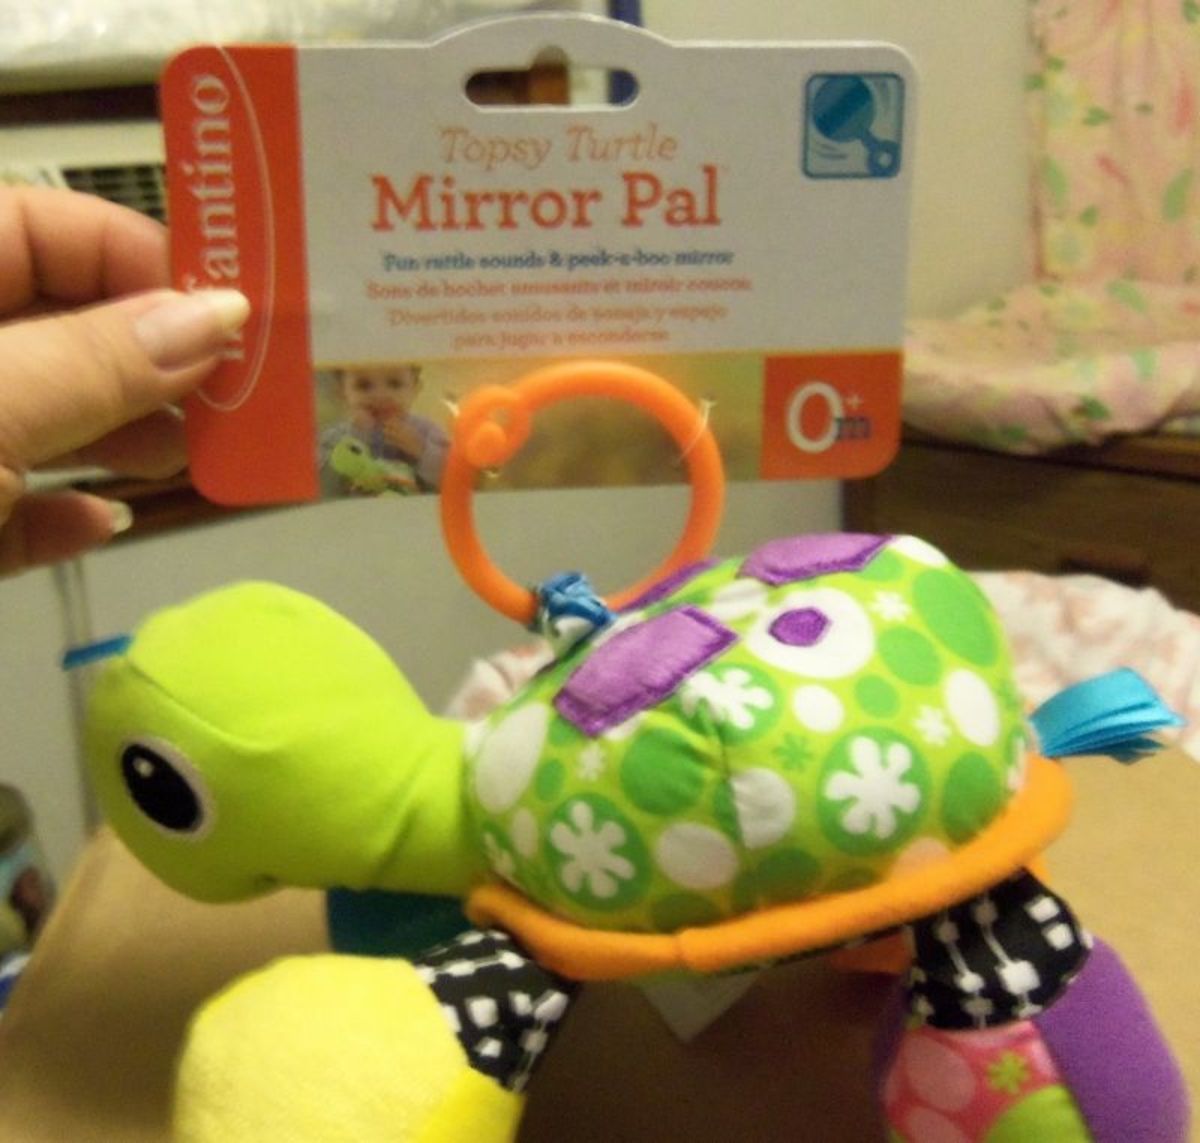 You can see how colorful this little guy is. His legs are soft and floppy with a crunchy sound when you squeeze them.  On the underside of the turtle is a mirror, so when it is hanging above the baby he/she can see their reflection.